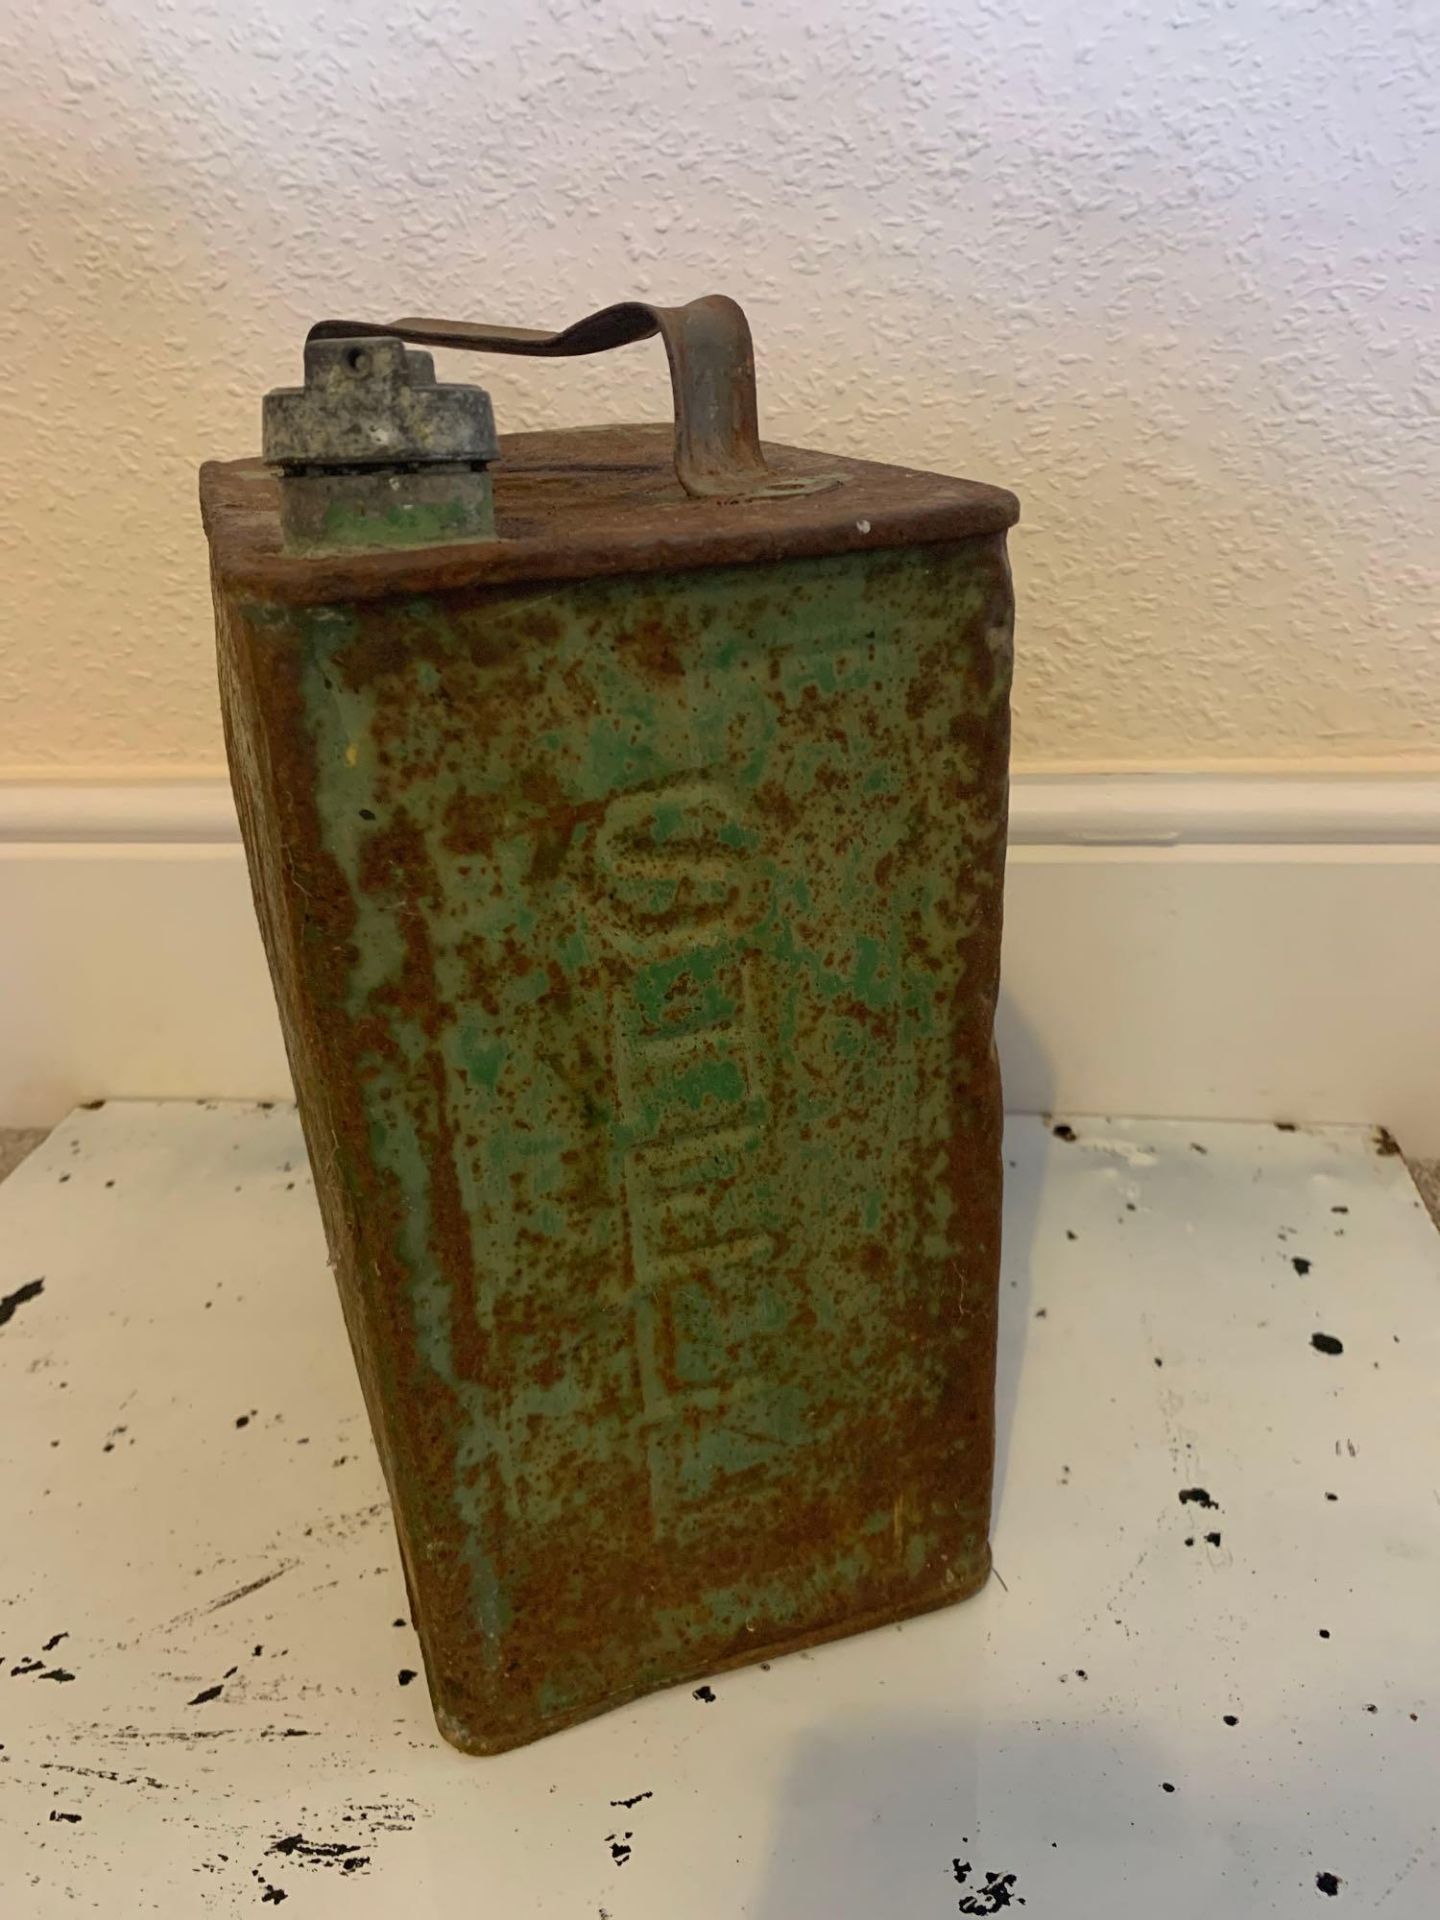 Shell Motor Spirit Metal Petrol Can. With Esso Lid In Original Colours With Significant Rusting